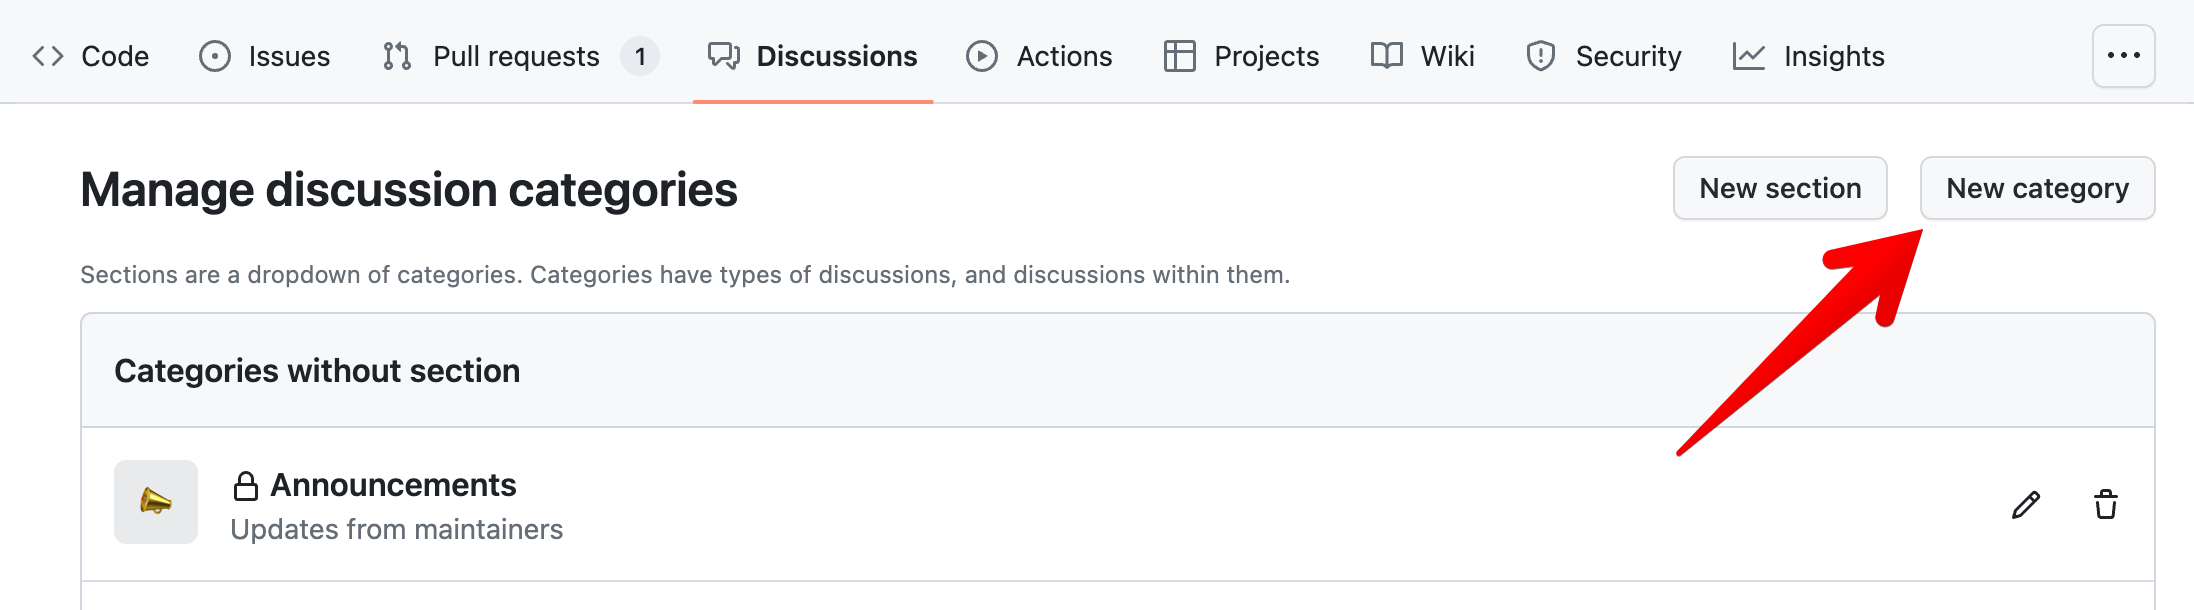 Adding "Discussions" Categories